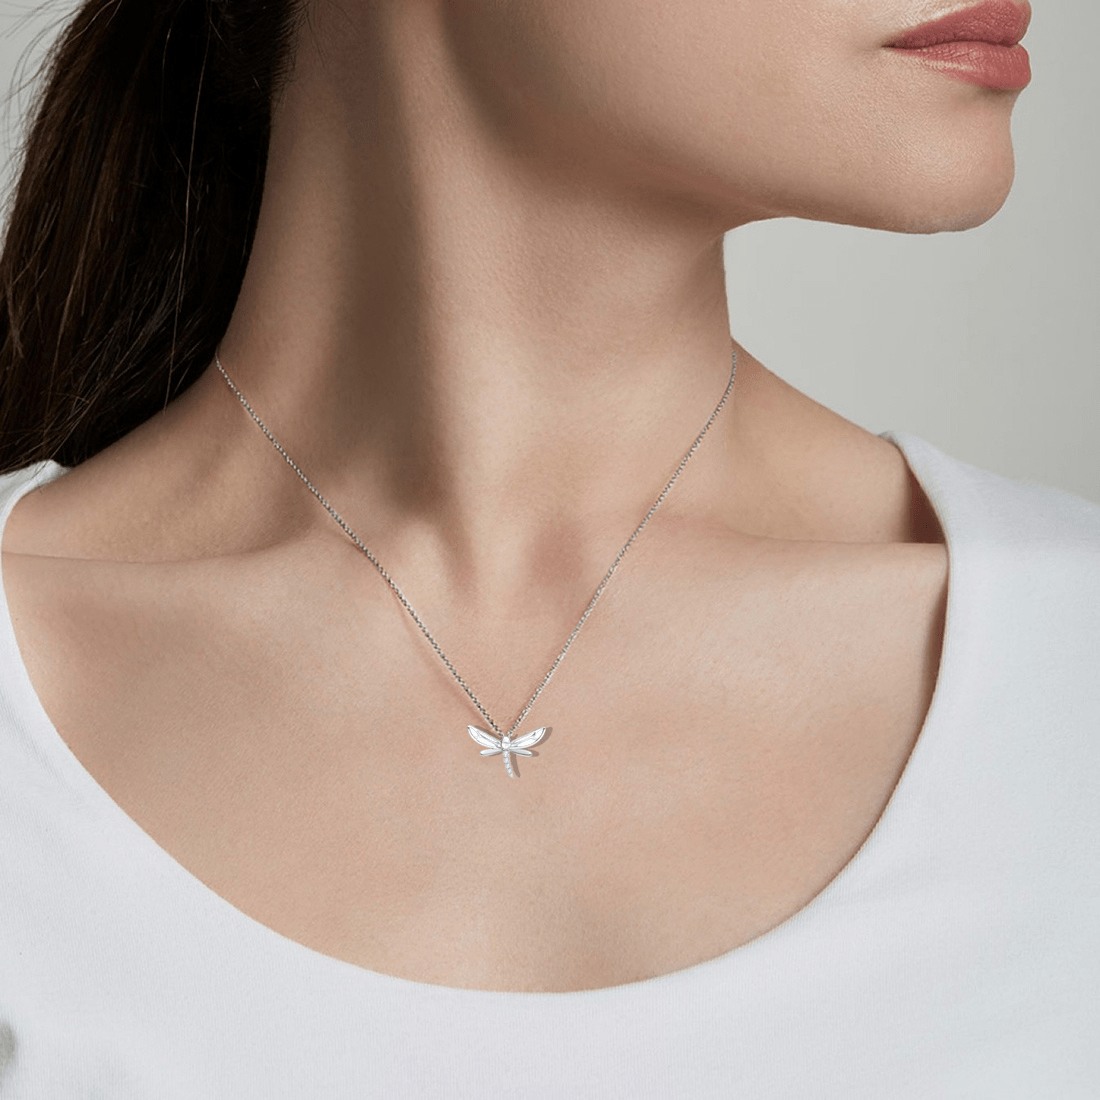 FANCIME CZ Dragonfly 14k Solid White Gold Necklace Show